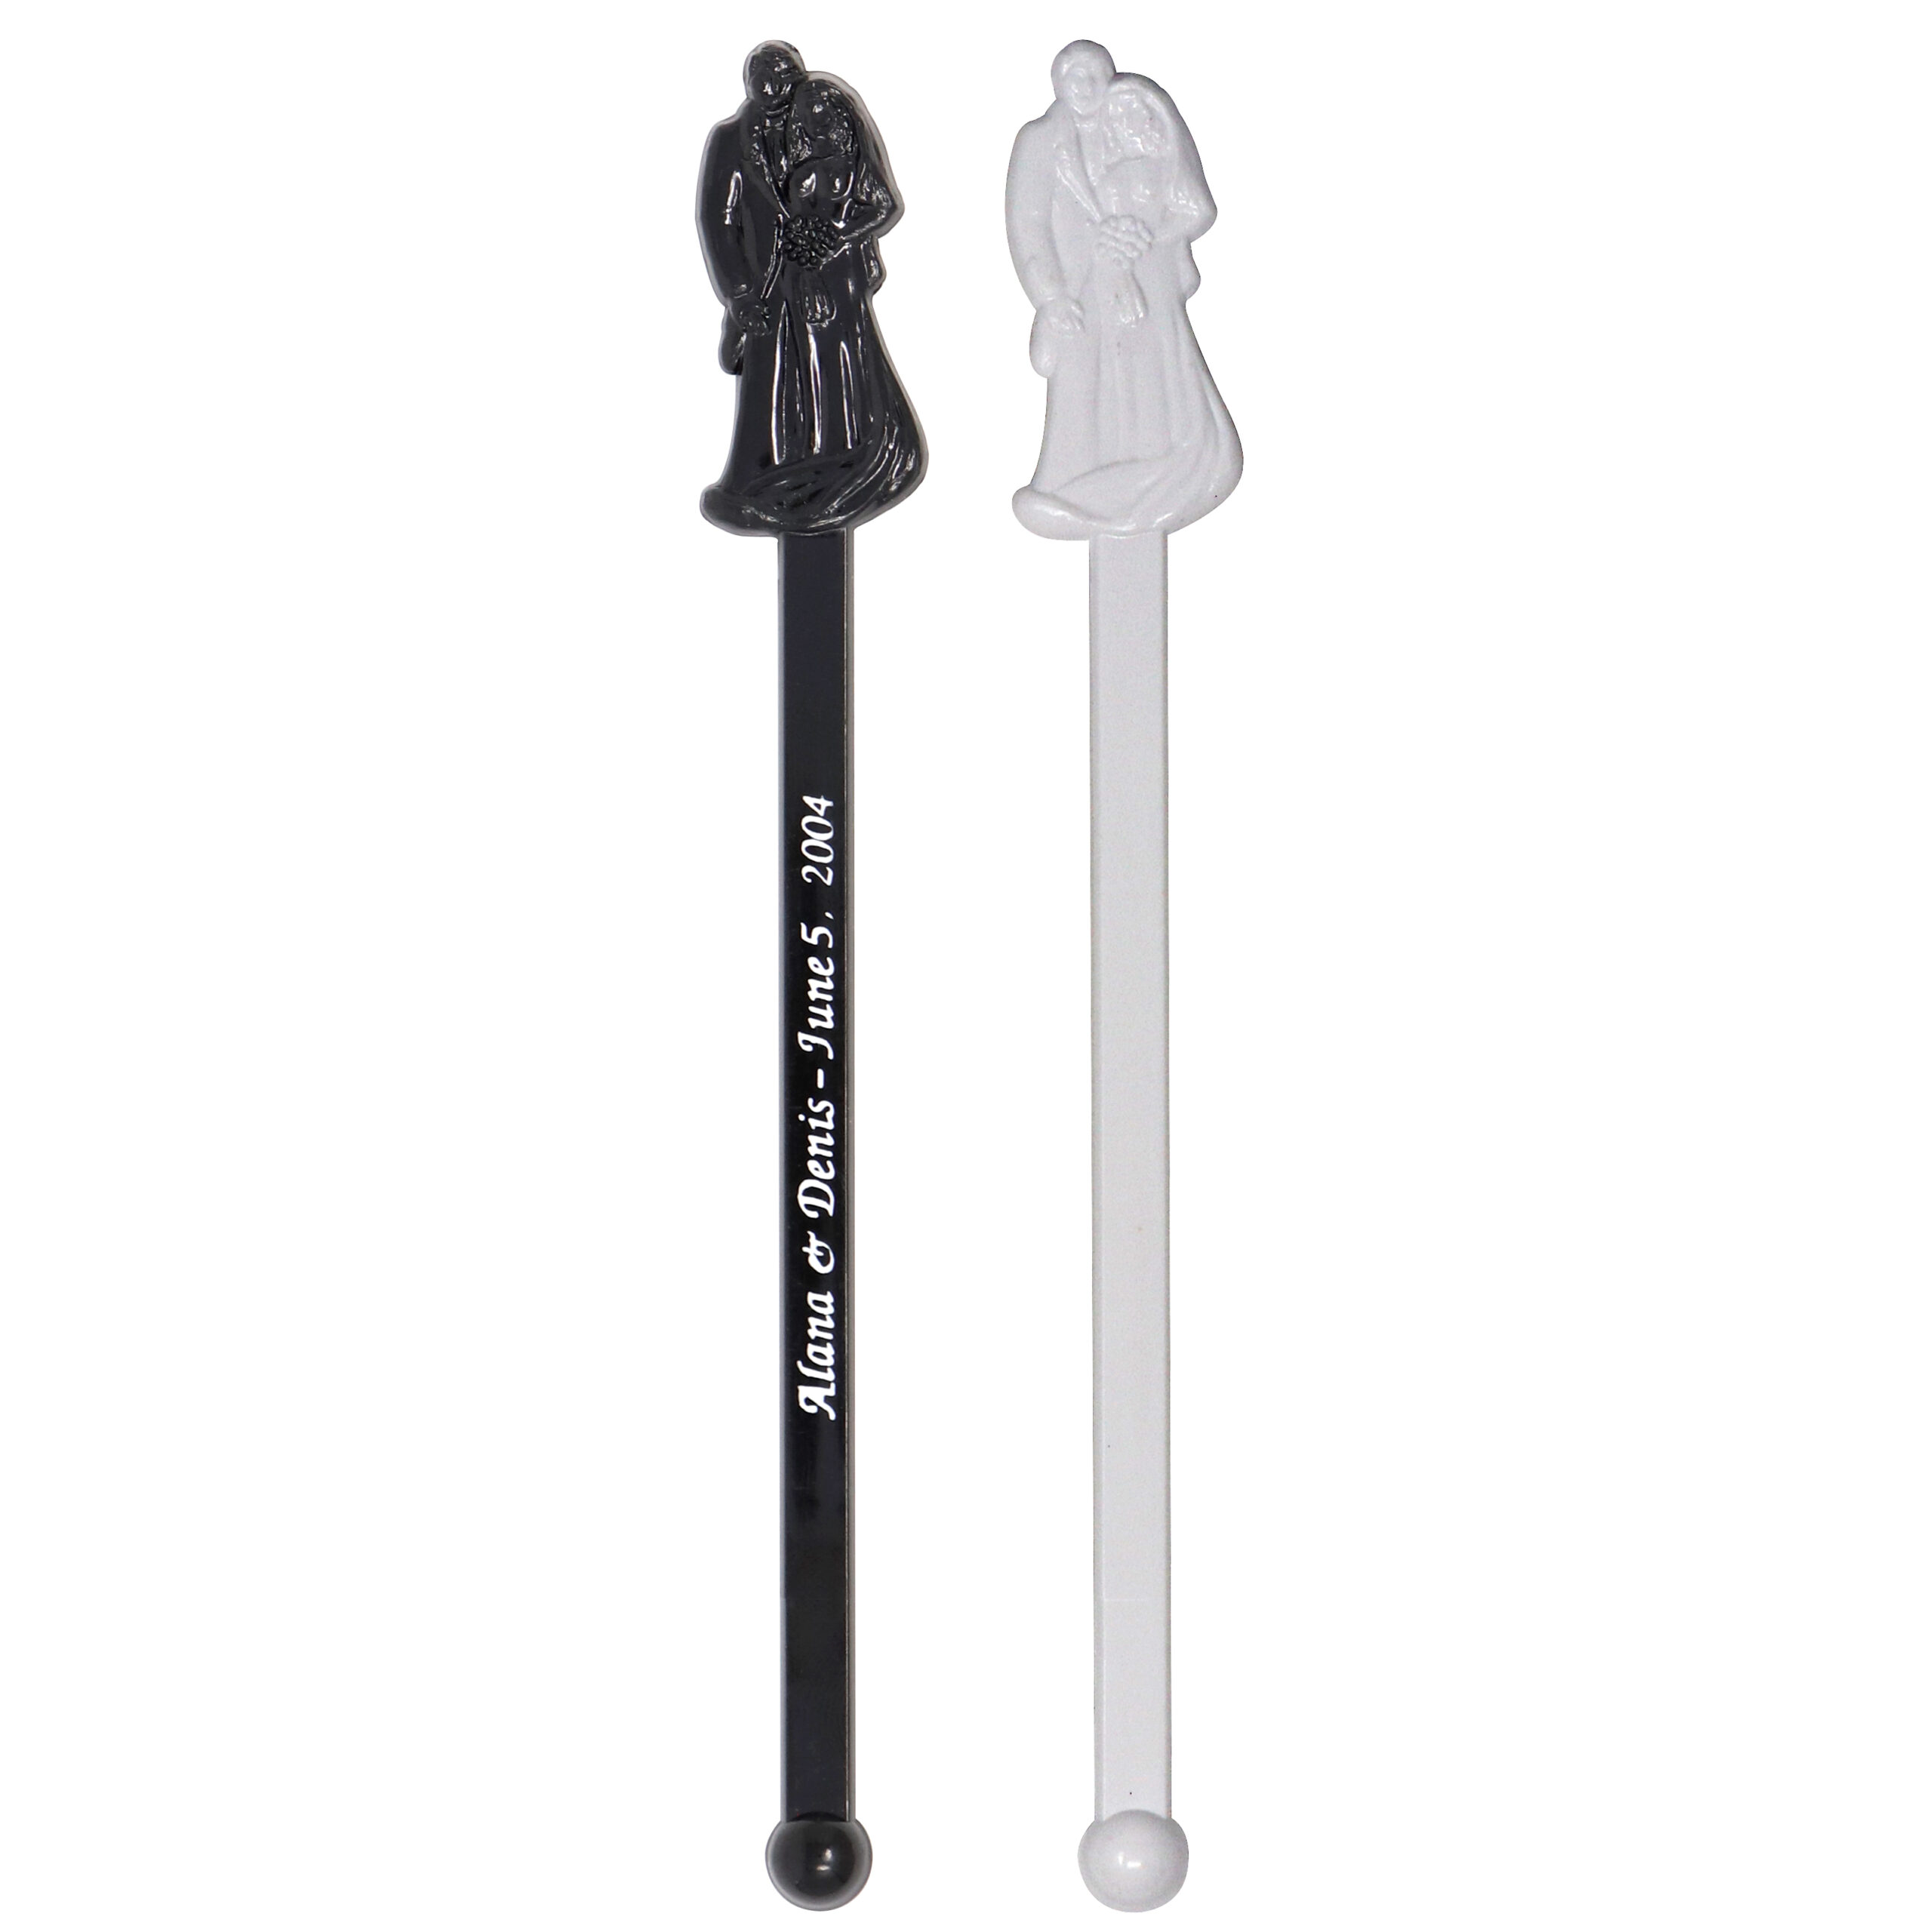 Black & White Bride & Groom Stir Stick with Imprint and rounded ball end